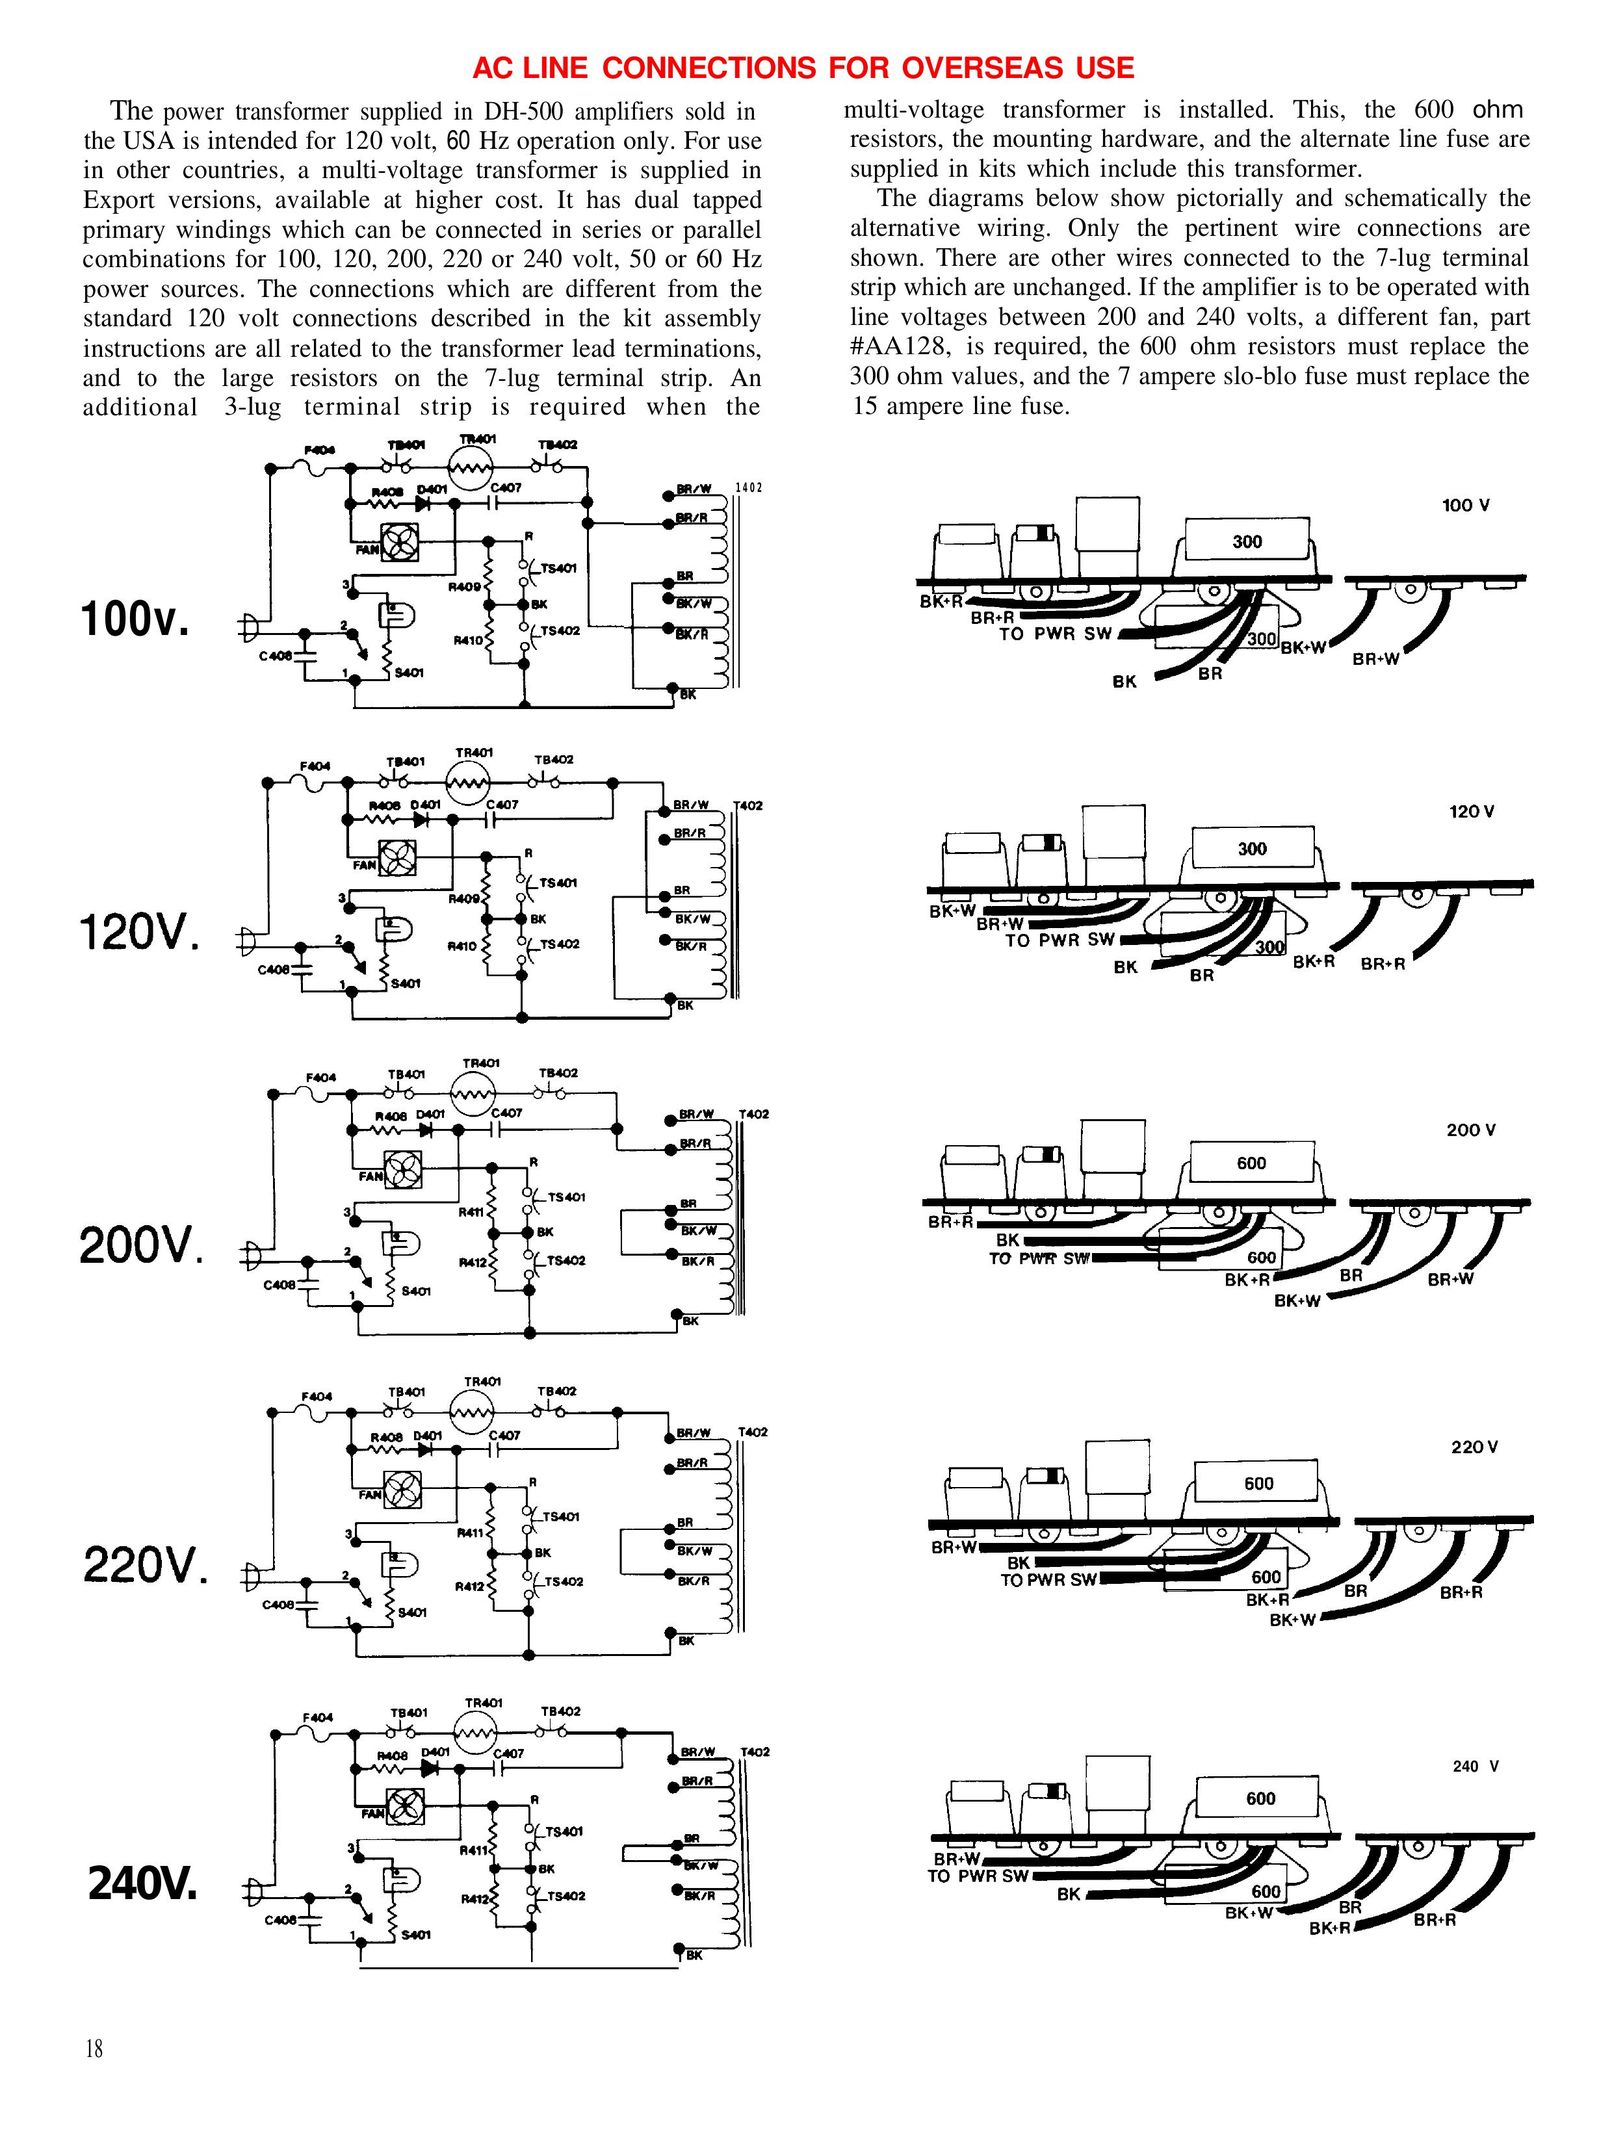 Hafler DH-500 Stereo Amplifier User Manual (Page 18)